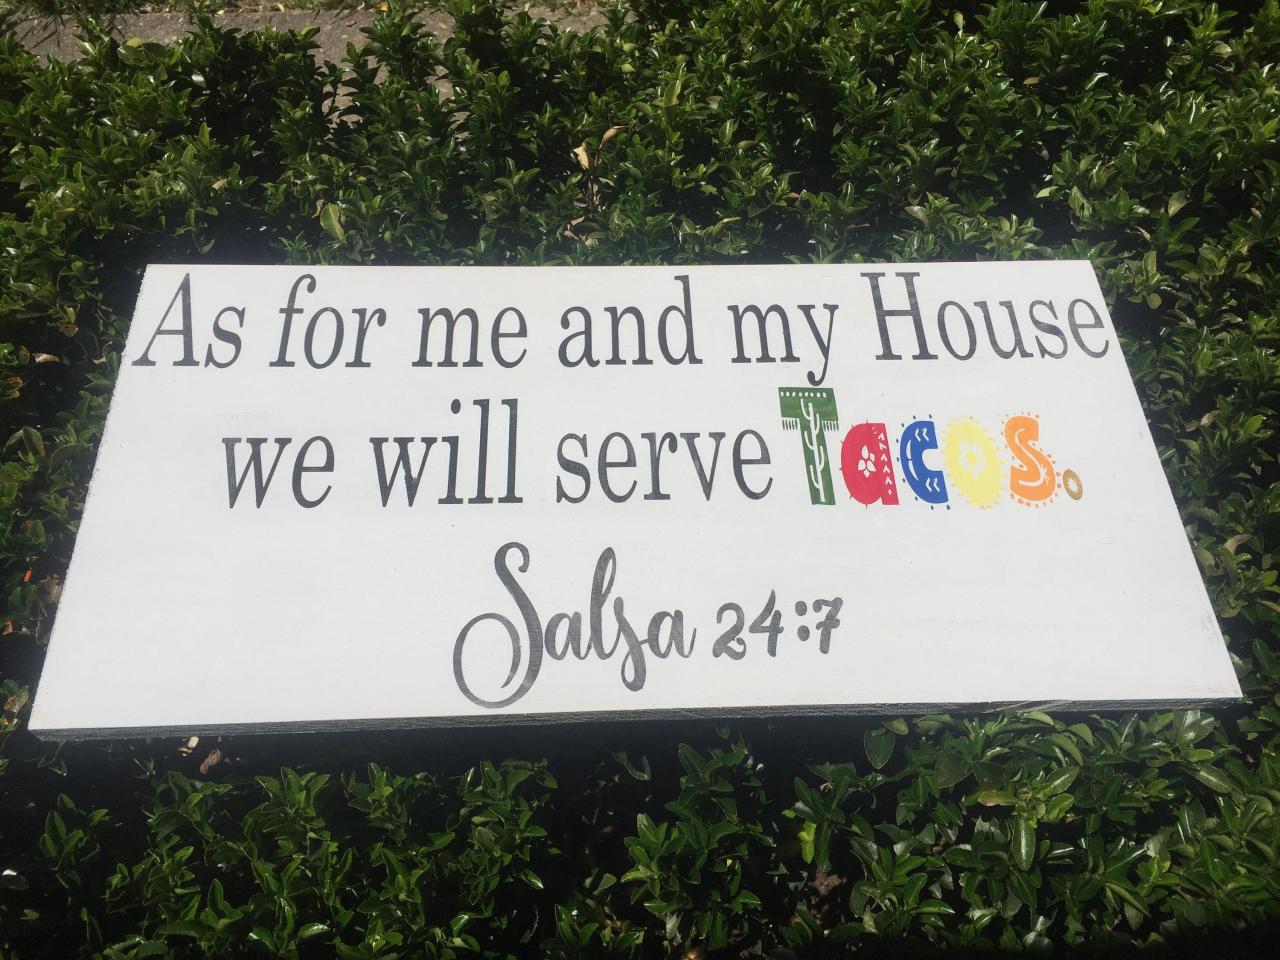 As For Me And My House We Will Serve Tacos. Salsa 24 7. 12x24 Hand Painted Wood Sign